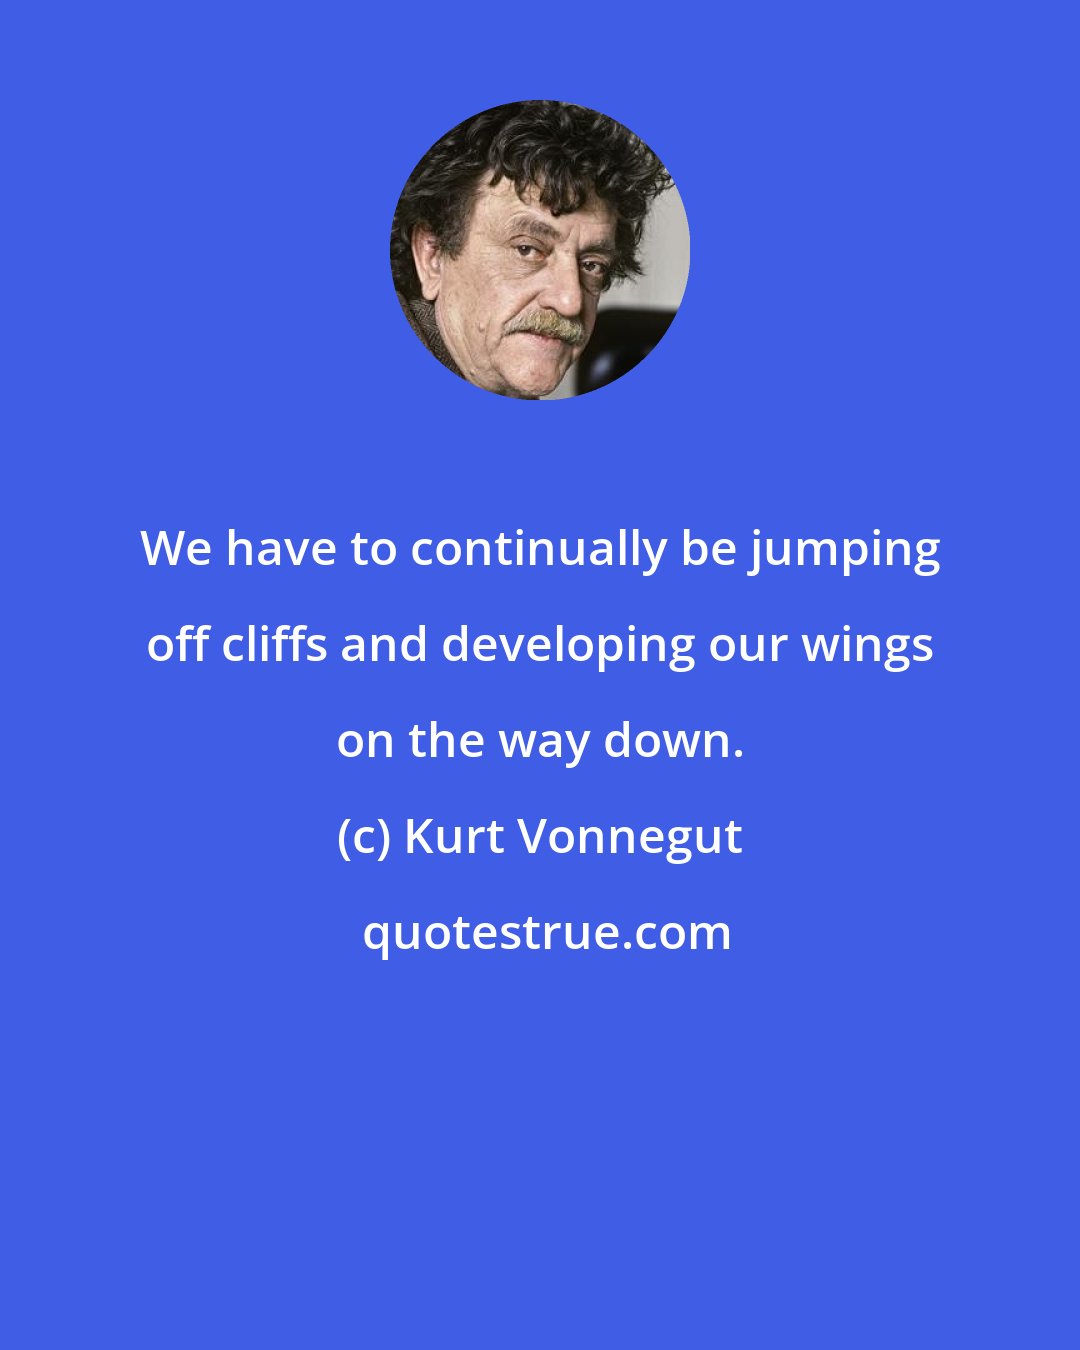 Kurt Vonnegut: We have to continually be jumping off cliffs and developing our wings on the way down.